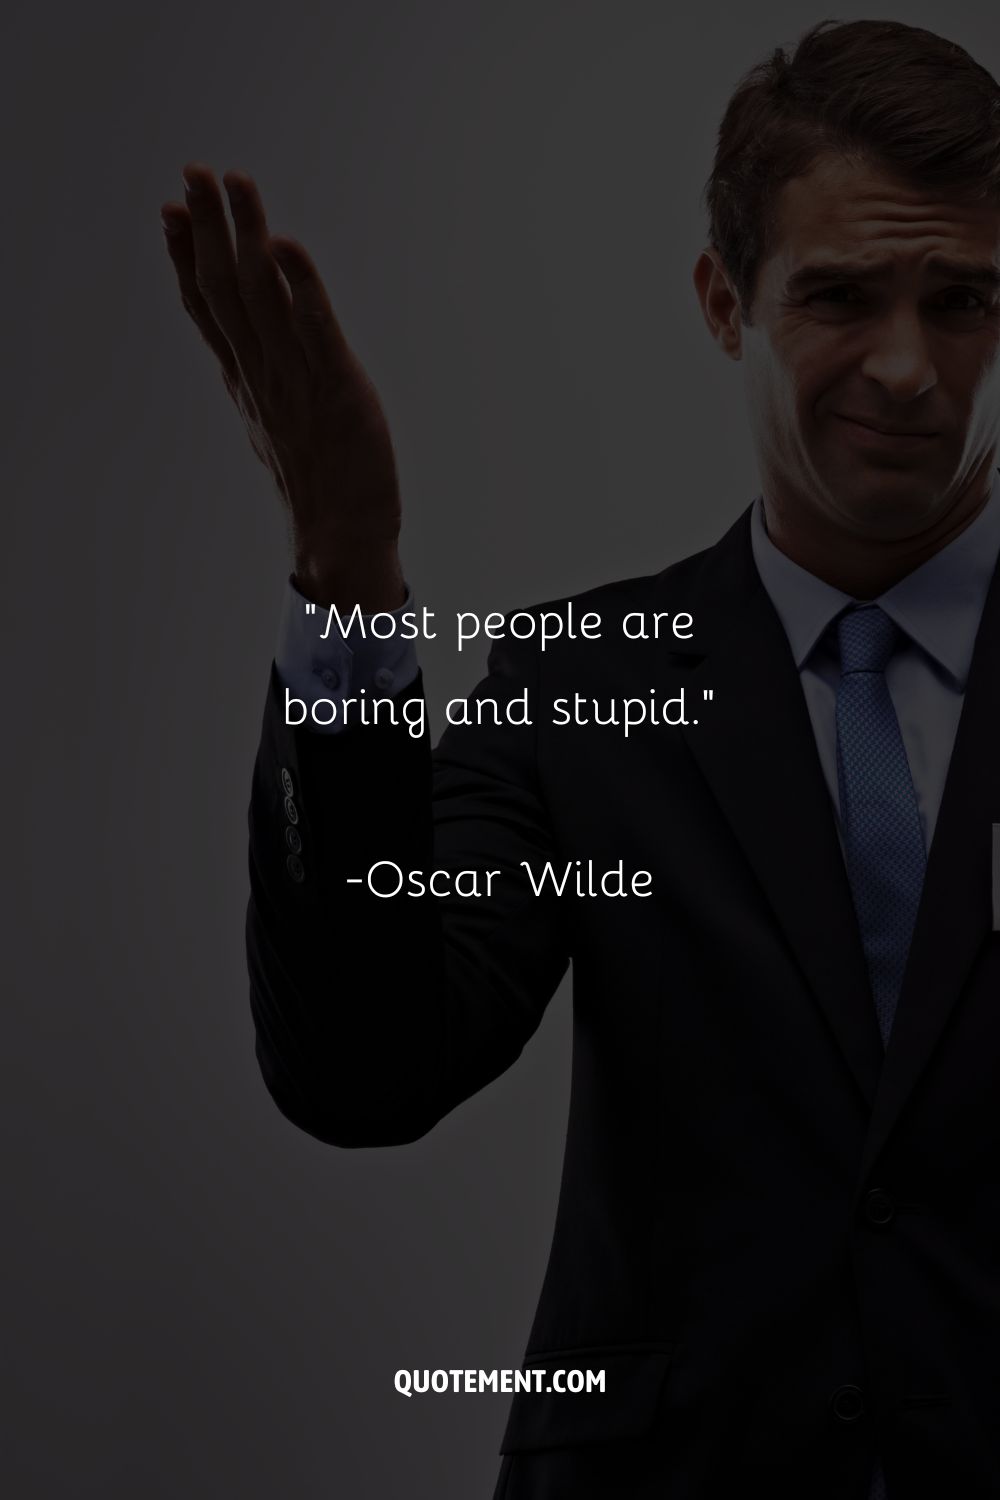 “Most people are boring and stupid.”